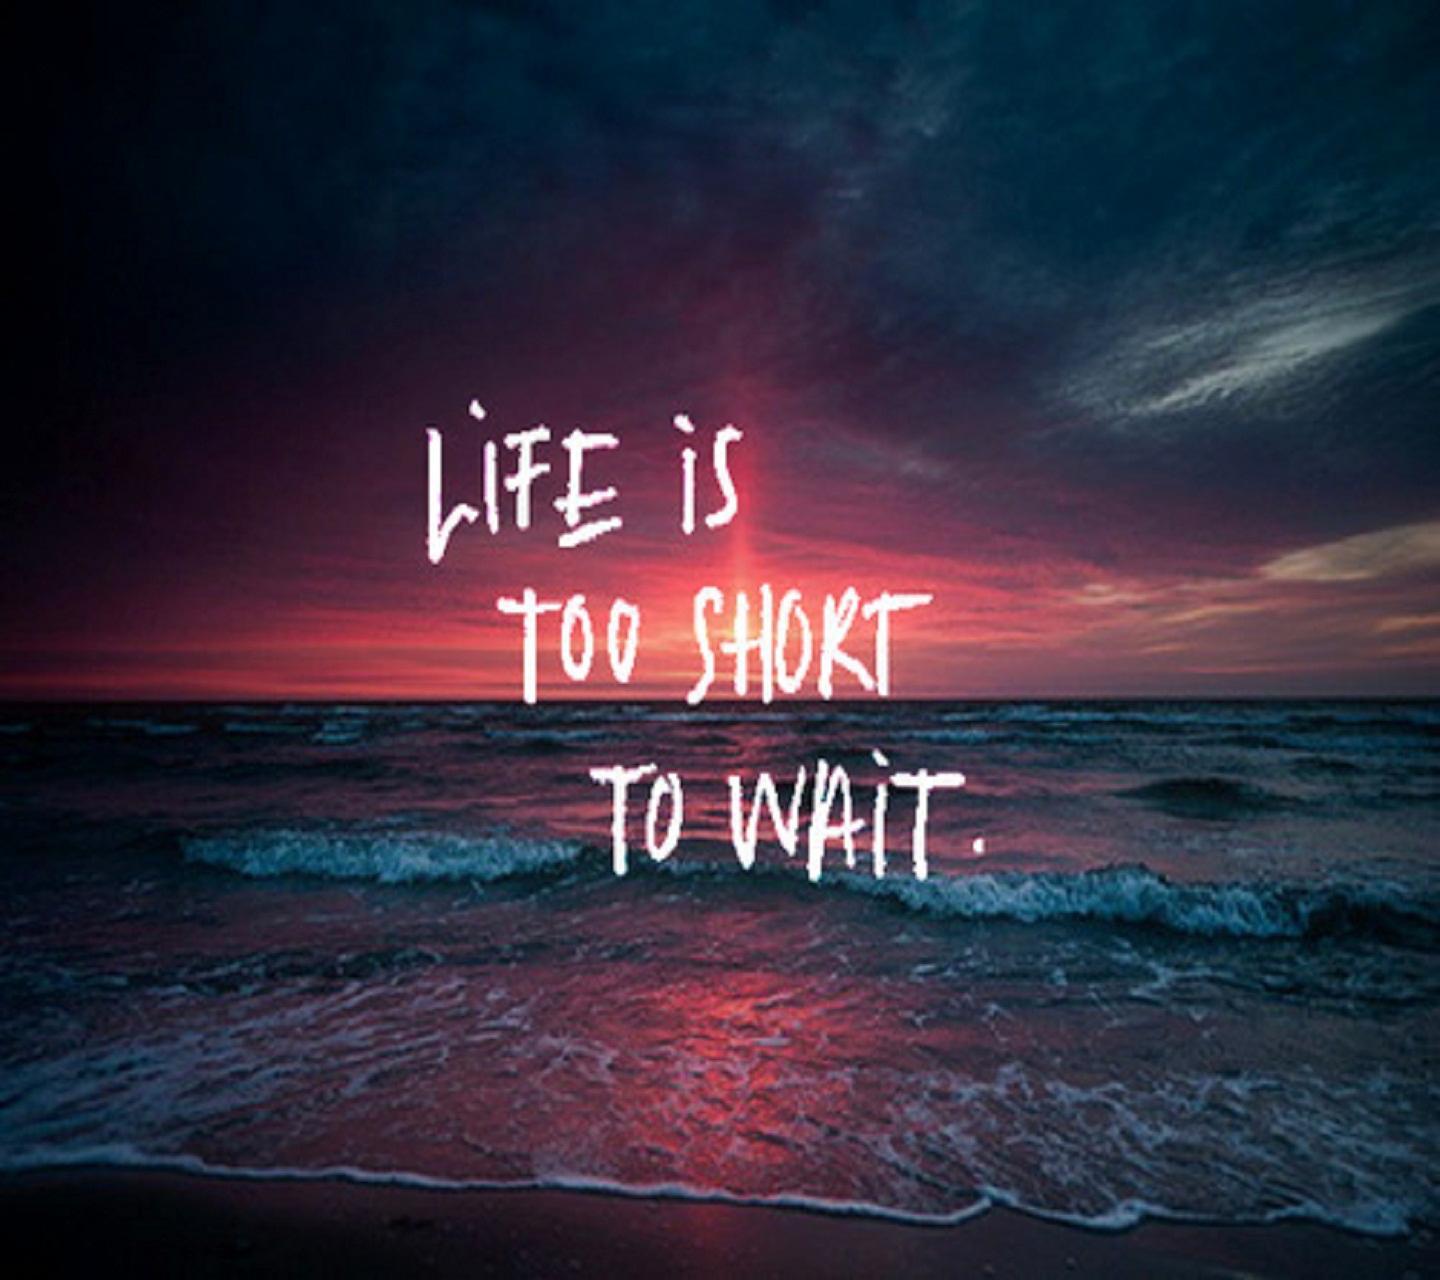 Download Life is too short HD wallpaper for laptop